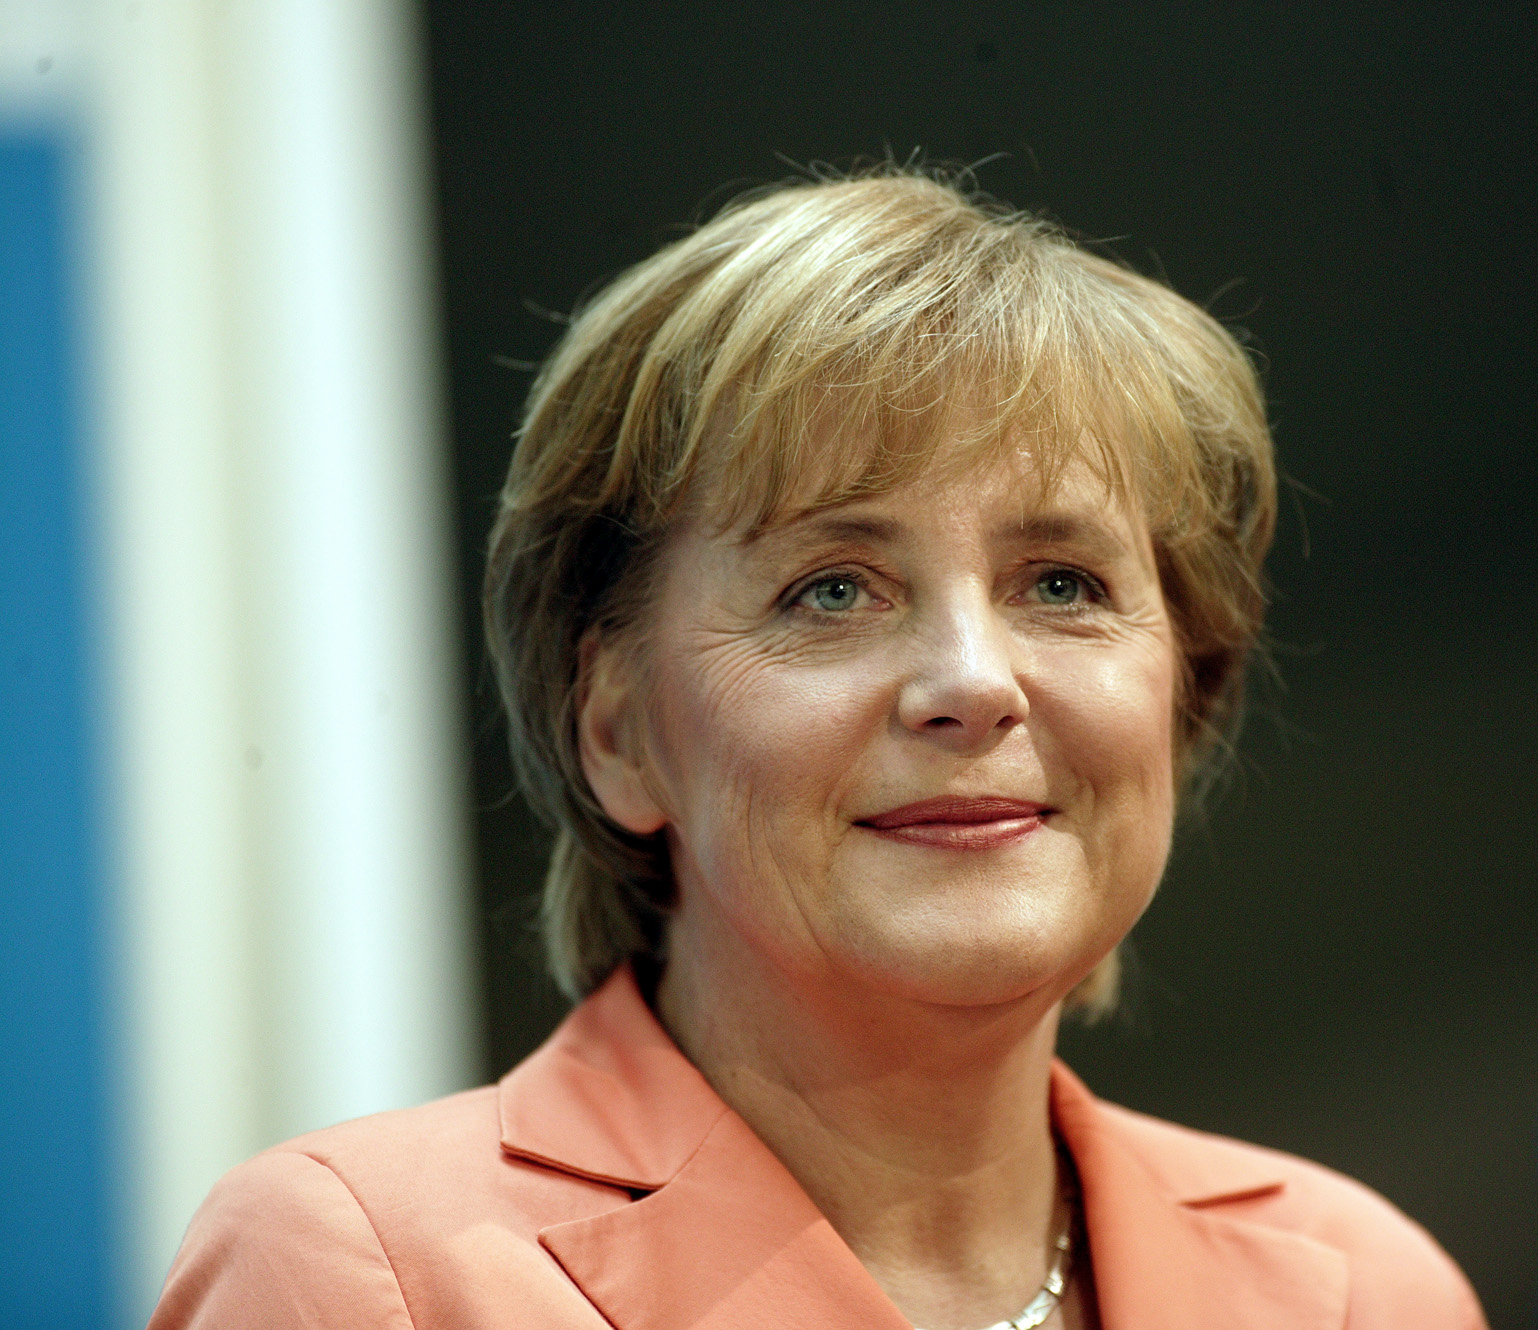 Merkel gears up for election shaped by economic crisis 